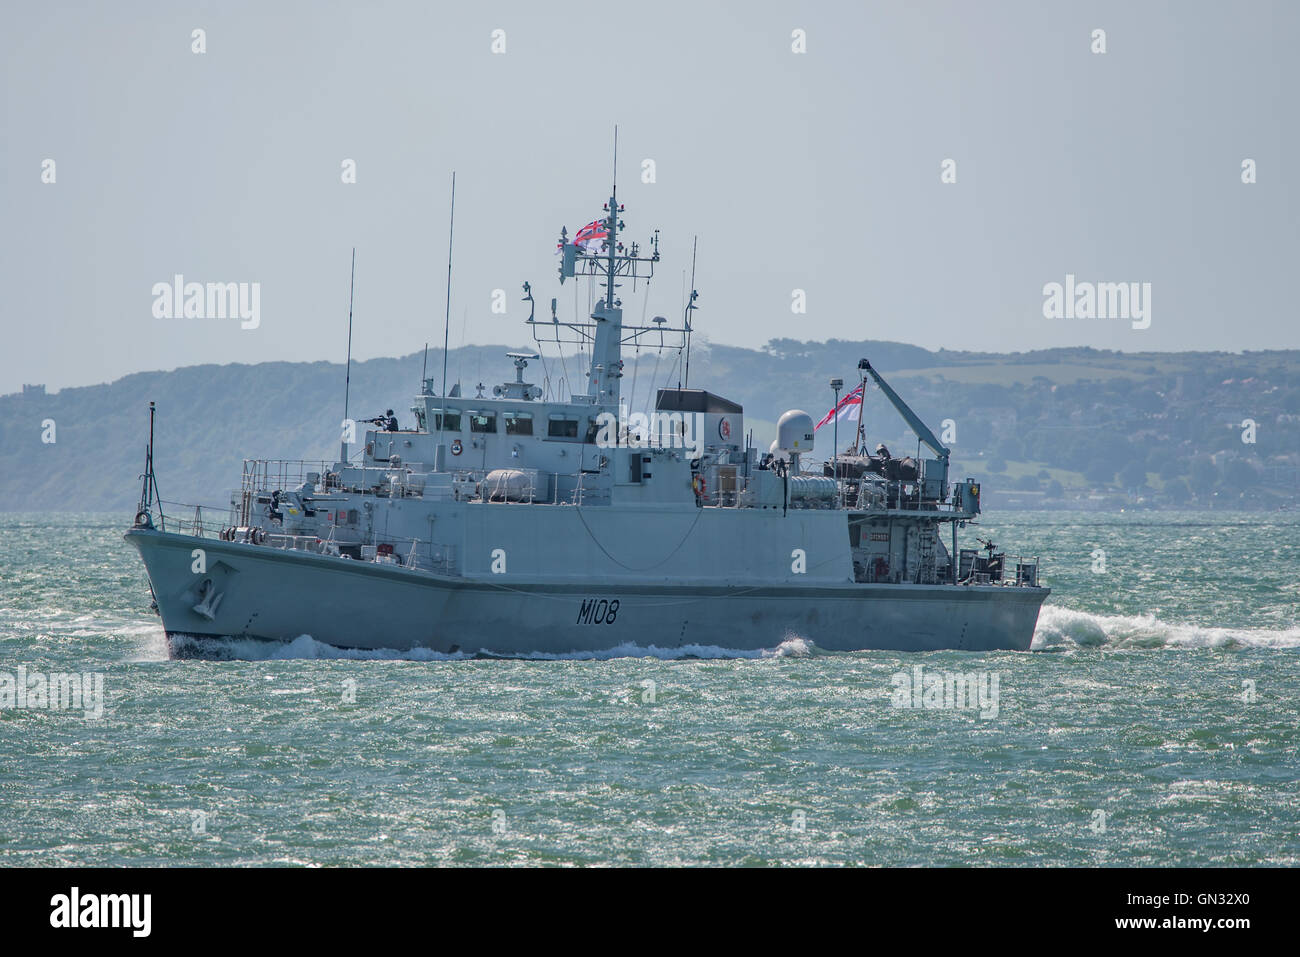 The British Royal Navy Mine Warfare Vessel, HMS Grimsby in demonstration action at Bournemouth Air Festival, UK on the 21st August 2016. Stock Photo